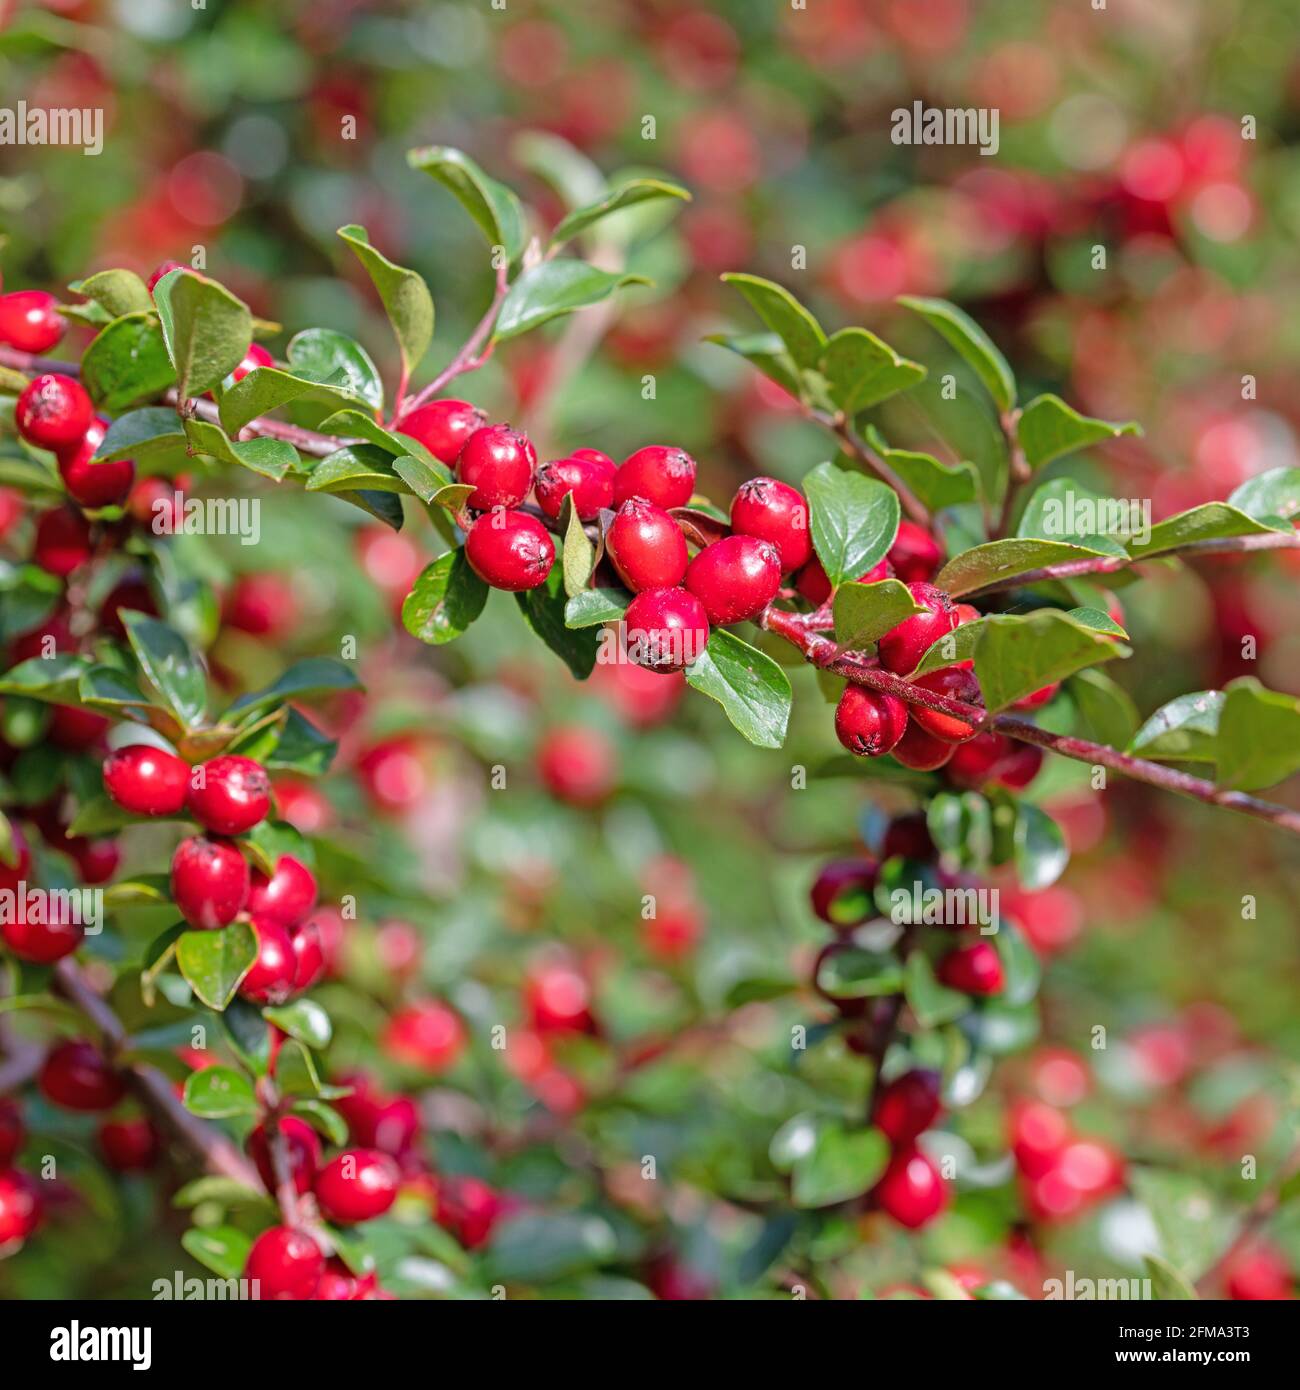 Ripe Cotoneaster fruits in autumn Stock Photo